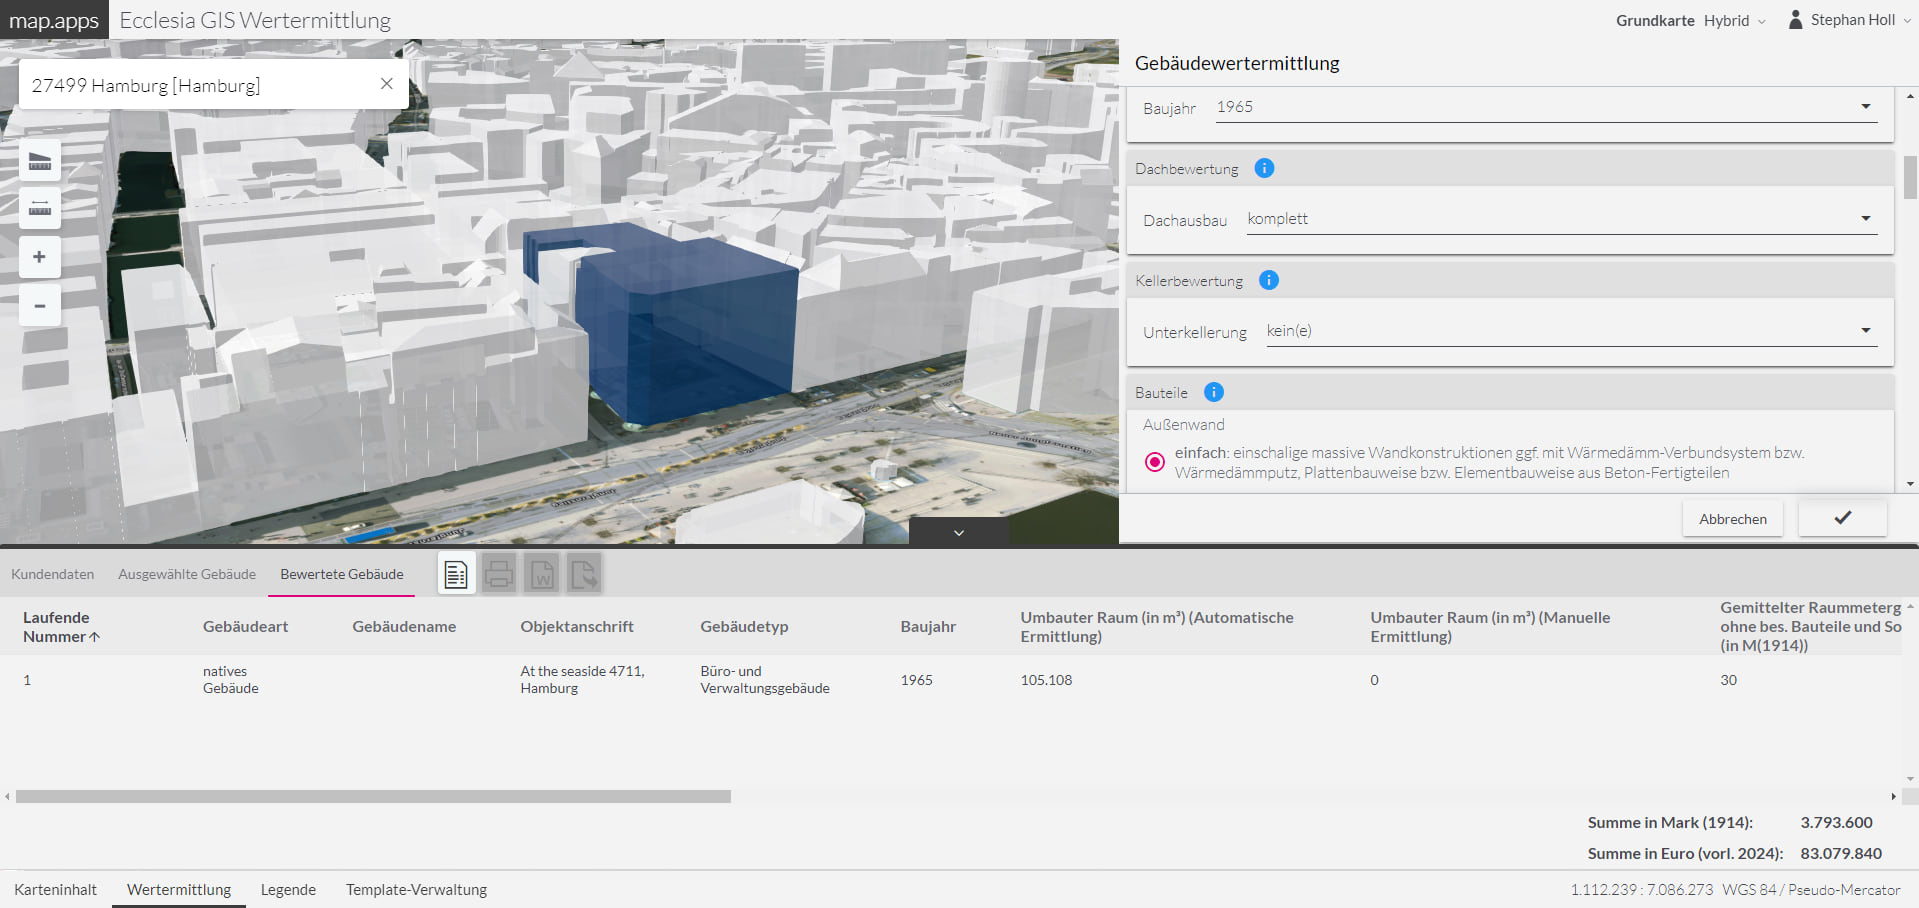 The image depicts "Ecclesia GIS Wertermittlung," a web application designed for property valuation. This tool is specifically utilized for assessing the value of properties located in Hamburg, Germany.